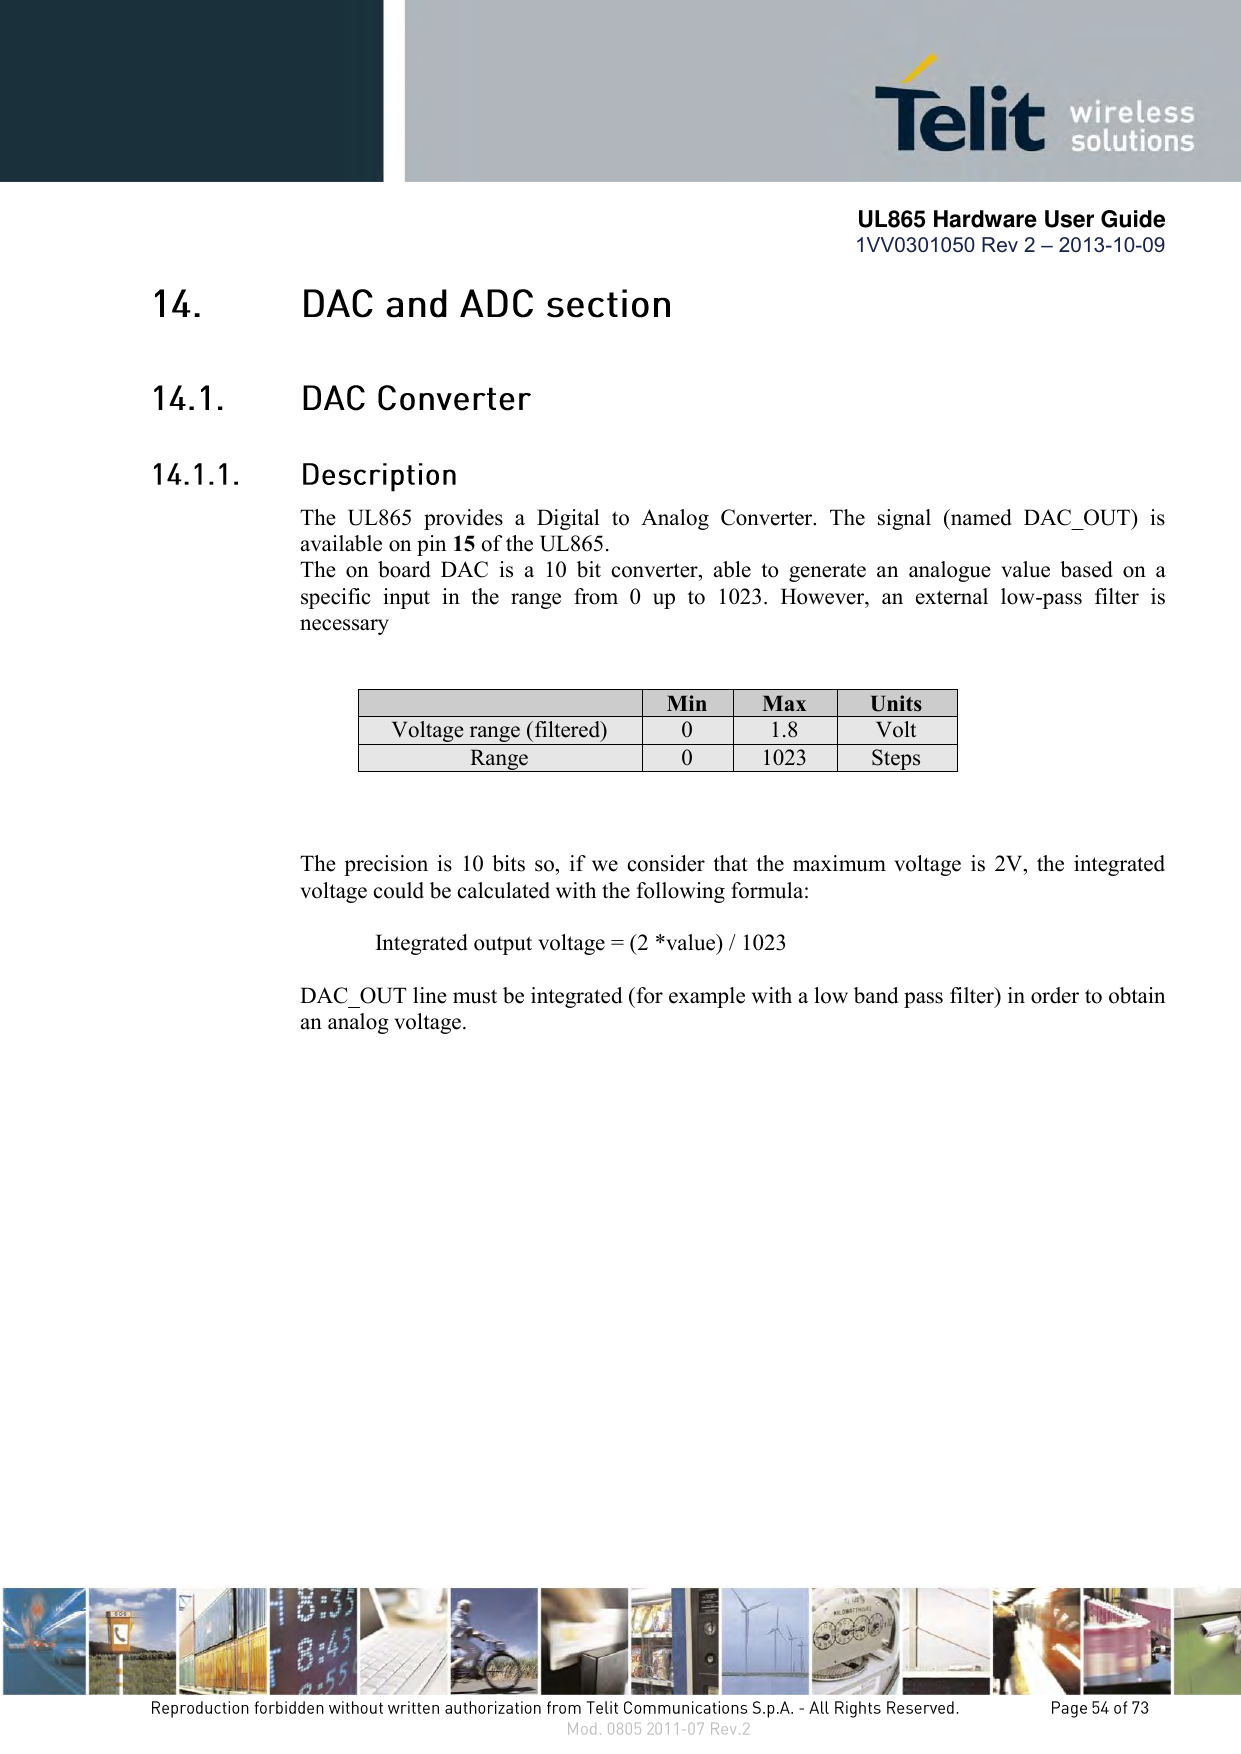       UL865 Hardware User Guide 1VV0301050 Rev 2 – 2013-10-09      The  UL865  provides  a  Digital  to  Analog  Converter.  The  signal  (named  DAC_OUT)  is available on pin 15 of the UL865. The  on  board  DAC  is  a  10  bit  converter,  able  to  generate  an  analogue  value  based  on  a specific  input  in  the  range  from  0  up  to  1023.  However,  an  external  low-pass  filter  is necessary    Min Max Units Voltage range (filtered) 0 1.8 Volt Range 0 1023 Steps    The precision is  10 bits so, if  we consider that the maximum voltage  is  2V, the integrated voltage could be calculated with the following formula:   Integrated output voltage = (2 *value) / 1023  DAC_OUT line must be integrated (for example with a low band pass filter) in order to obtain an analog voltage. 